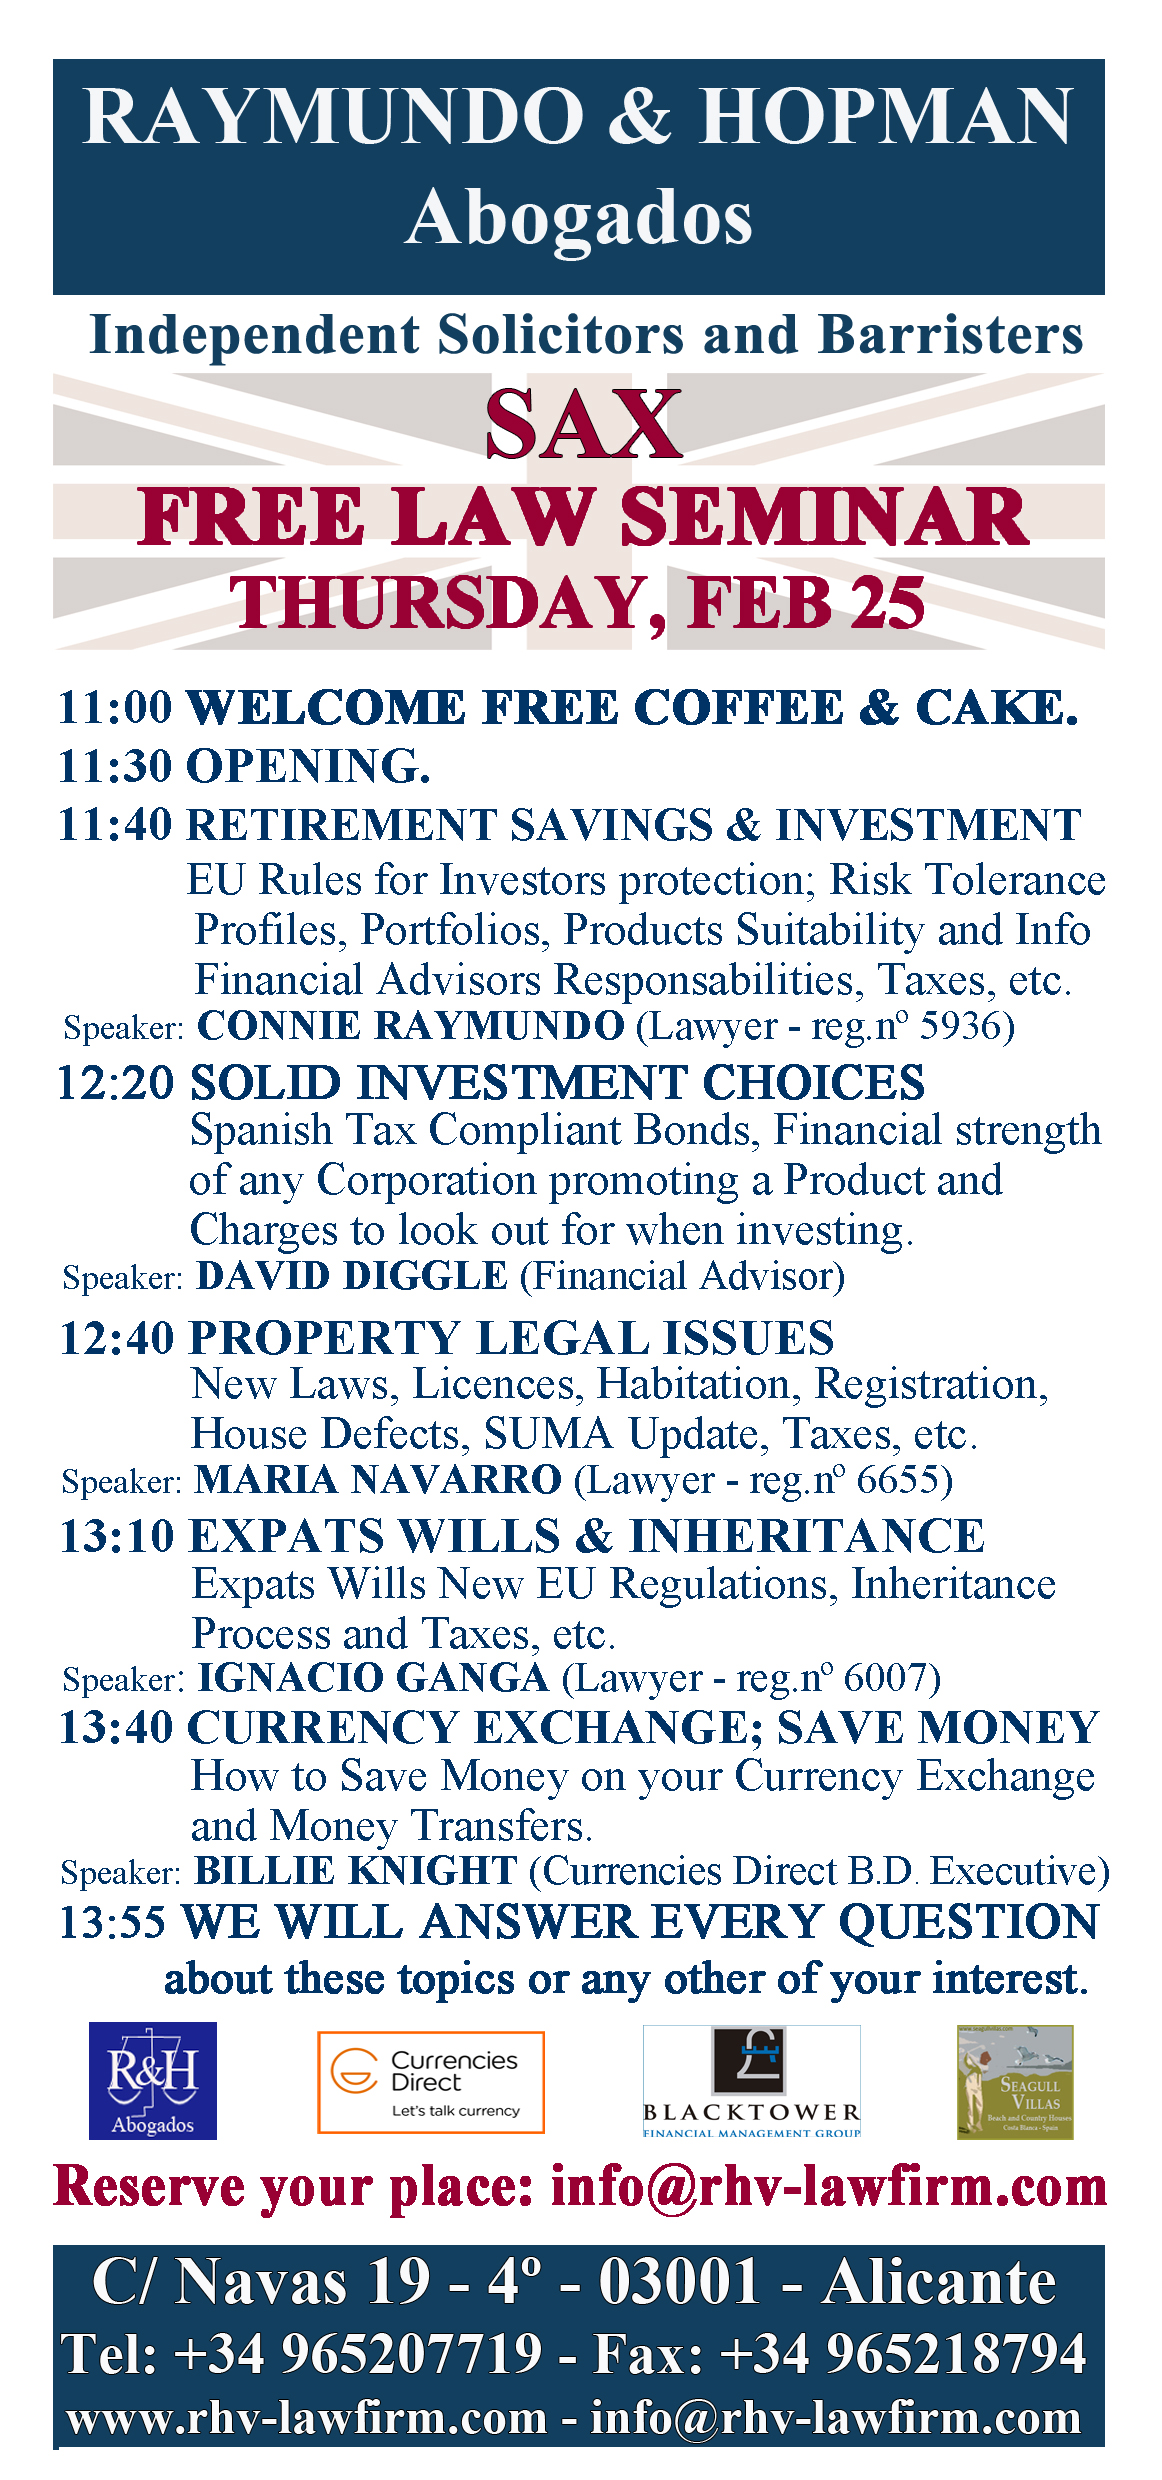 Free Law Seminar - Abogados Alicante, Independent Solicitor, Barristers, Lawyers, Tax Advisors, Conveyance & Property Experts, Architect, Translators, etc.